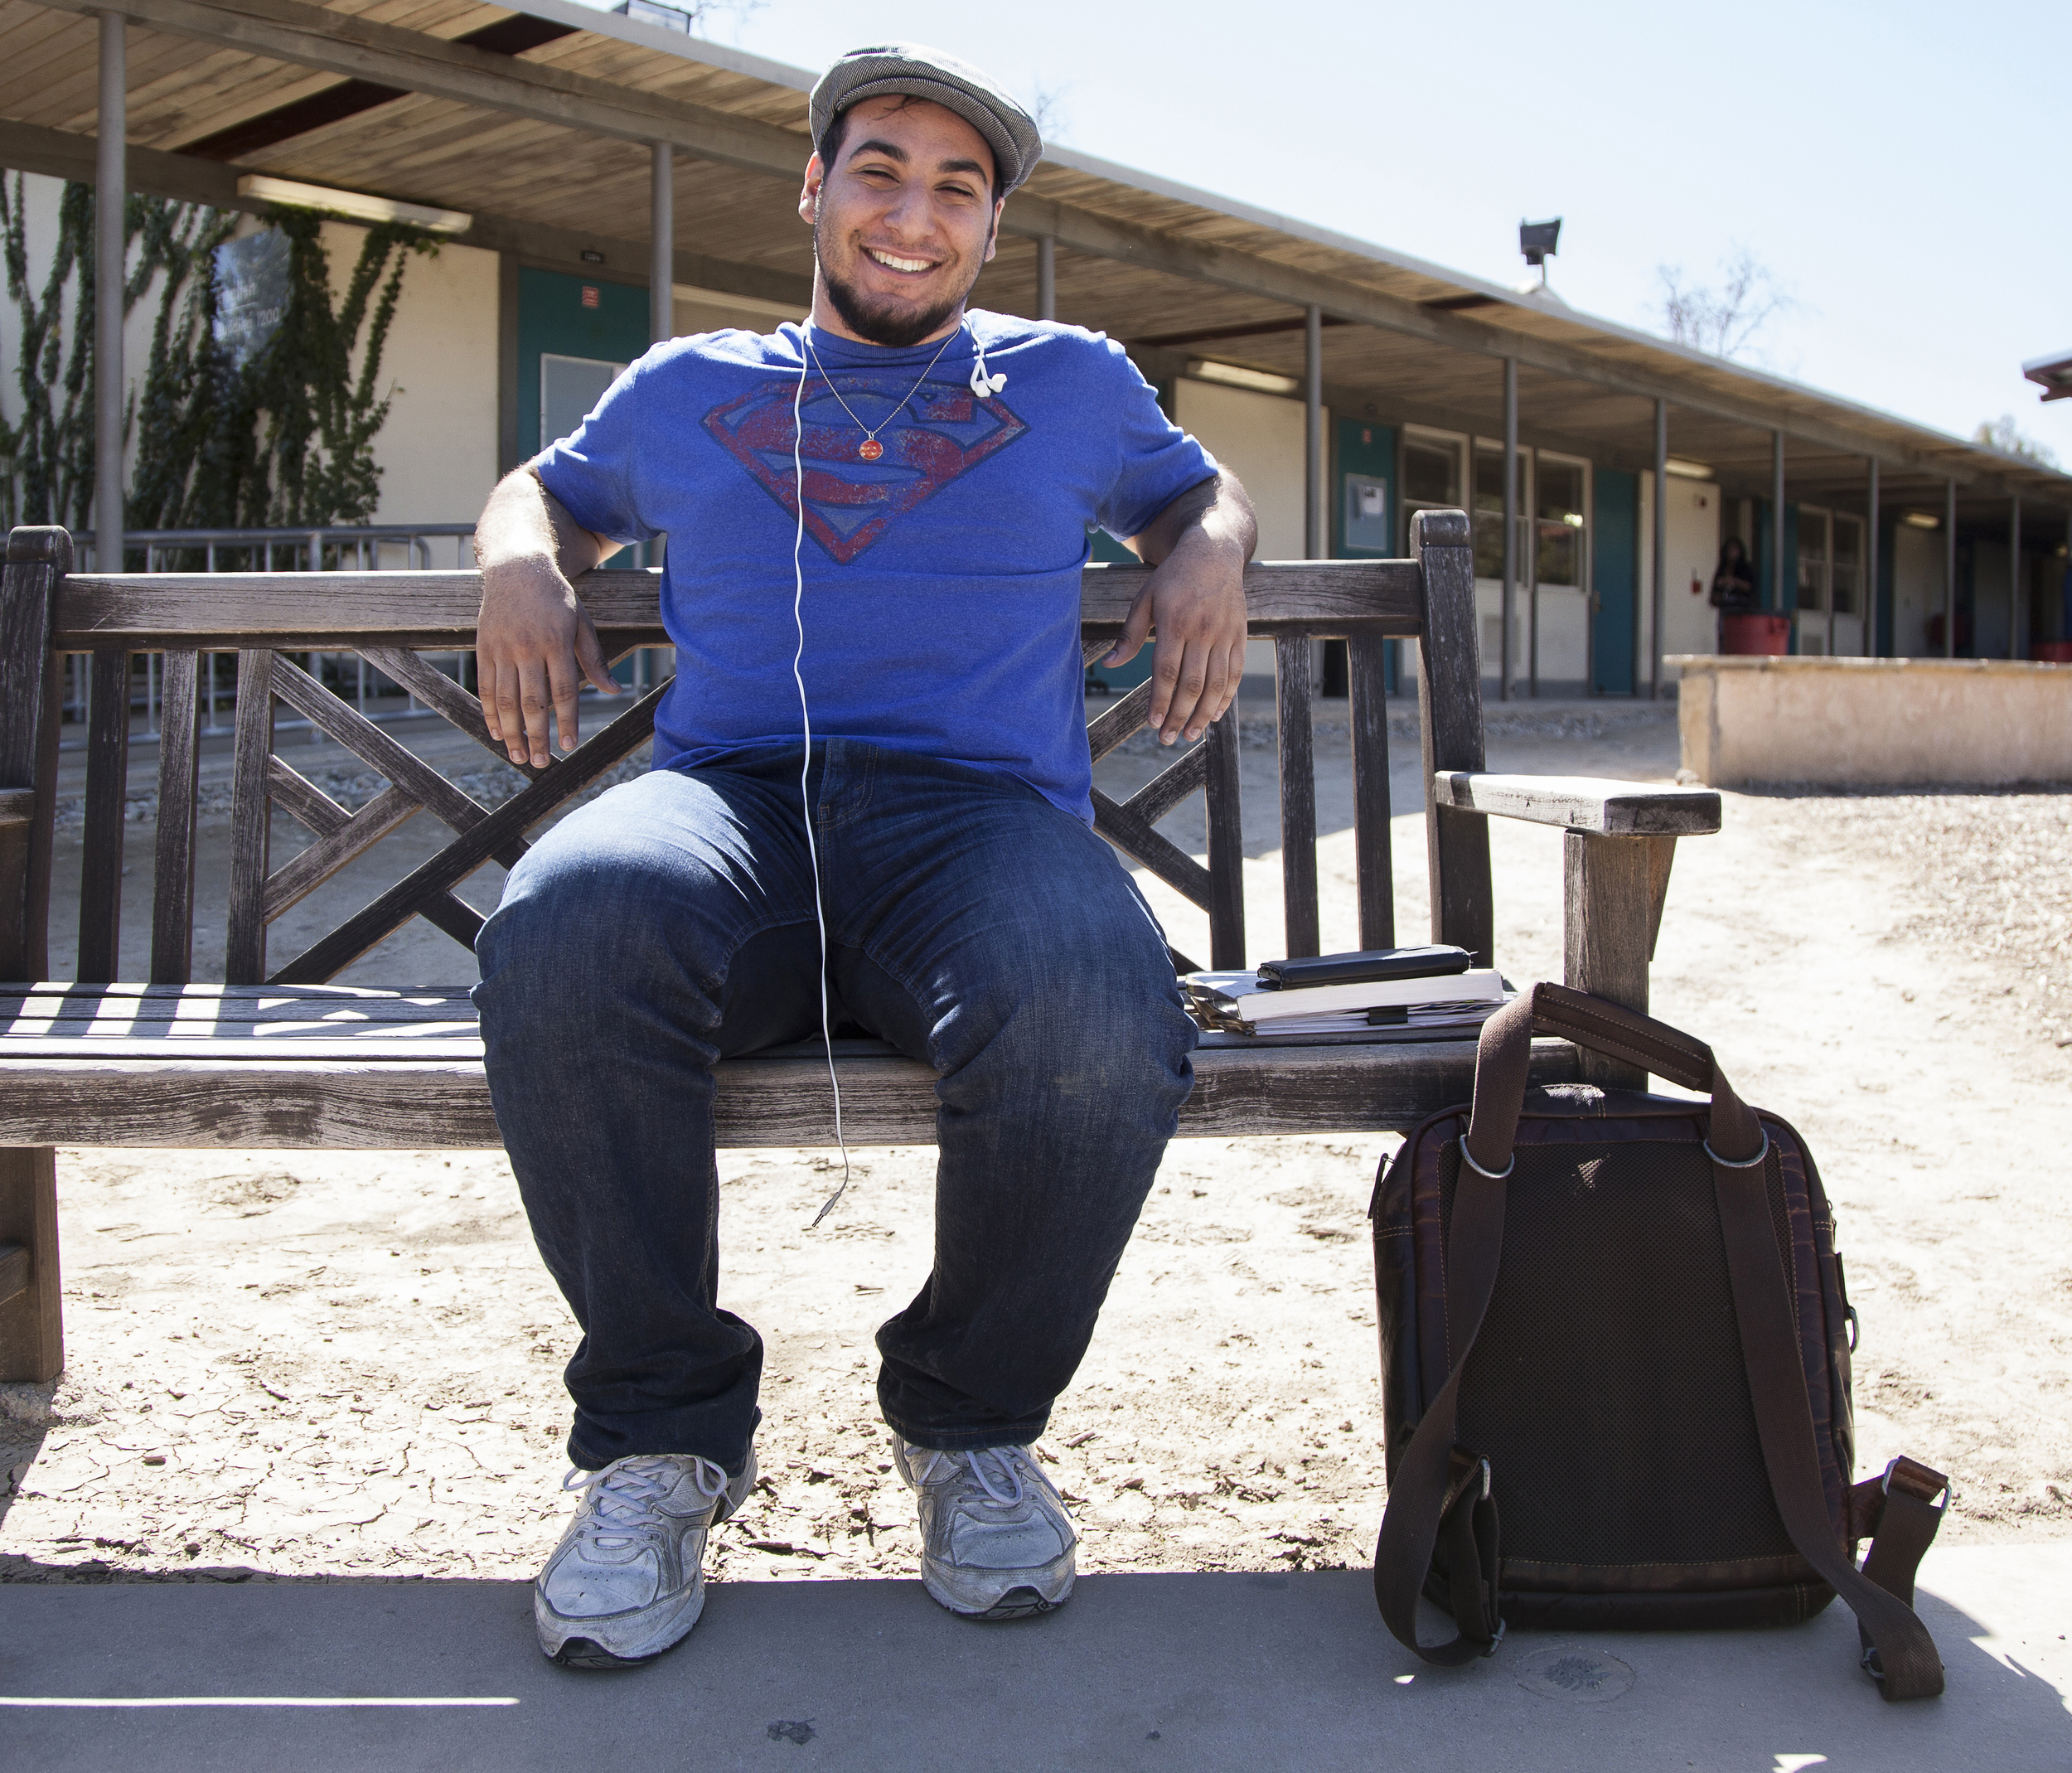  17-year-old Alex Arzoo, a biology major, sits on a bench in the Botanical Garden of Pierce College in Woodland Hills, Calif. on Wednesday, Feb. 24, 2016. Arzoo's parents went to UCLA. "My parents never pressured me into going to UCLA even though my 